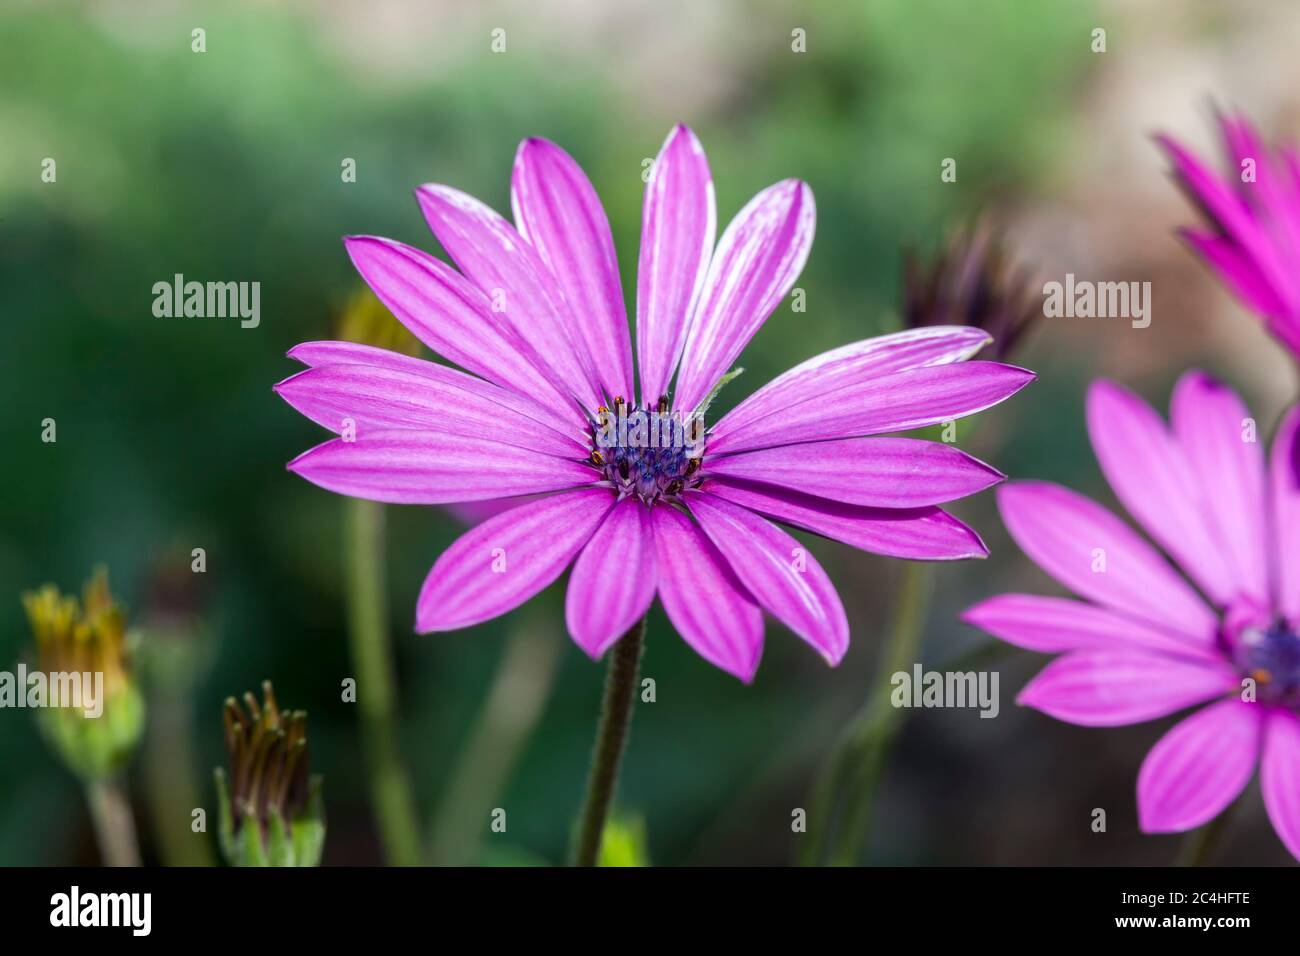 Osteospermum ecklonsis a South Africa violet purple flower plant commonly known as Cape marguerite Stock Photo